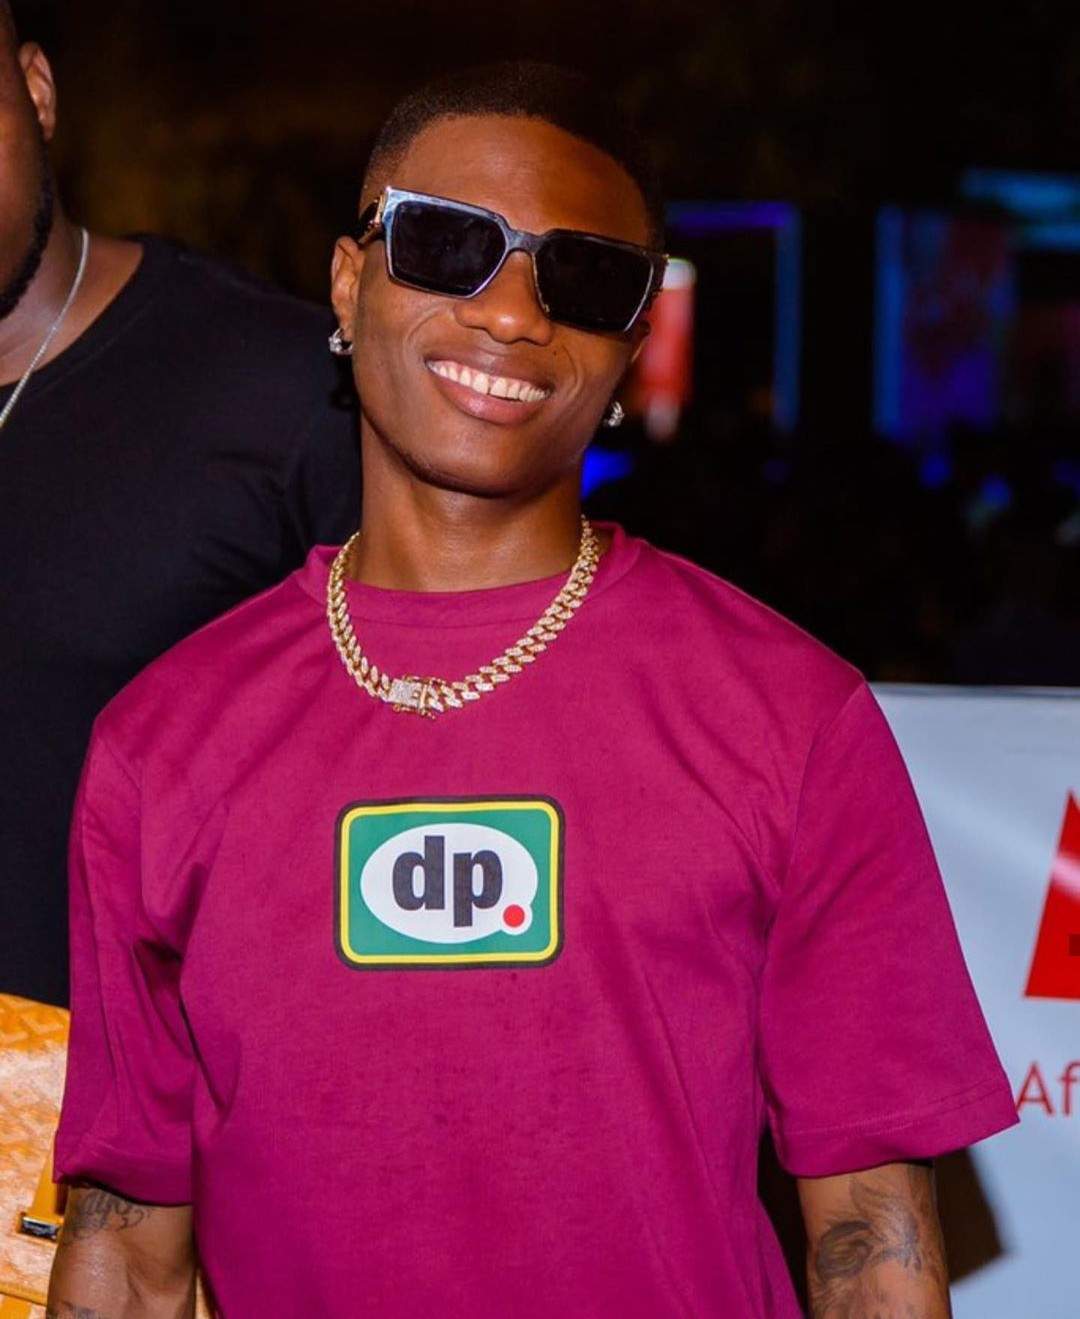 Wizkid reacts to video of Davido advertising COZA church